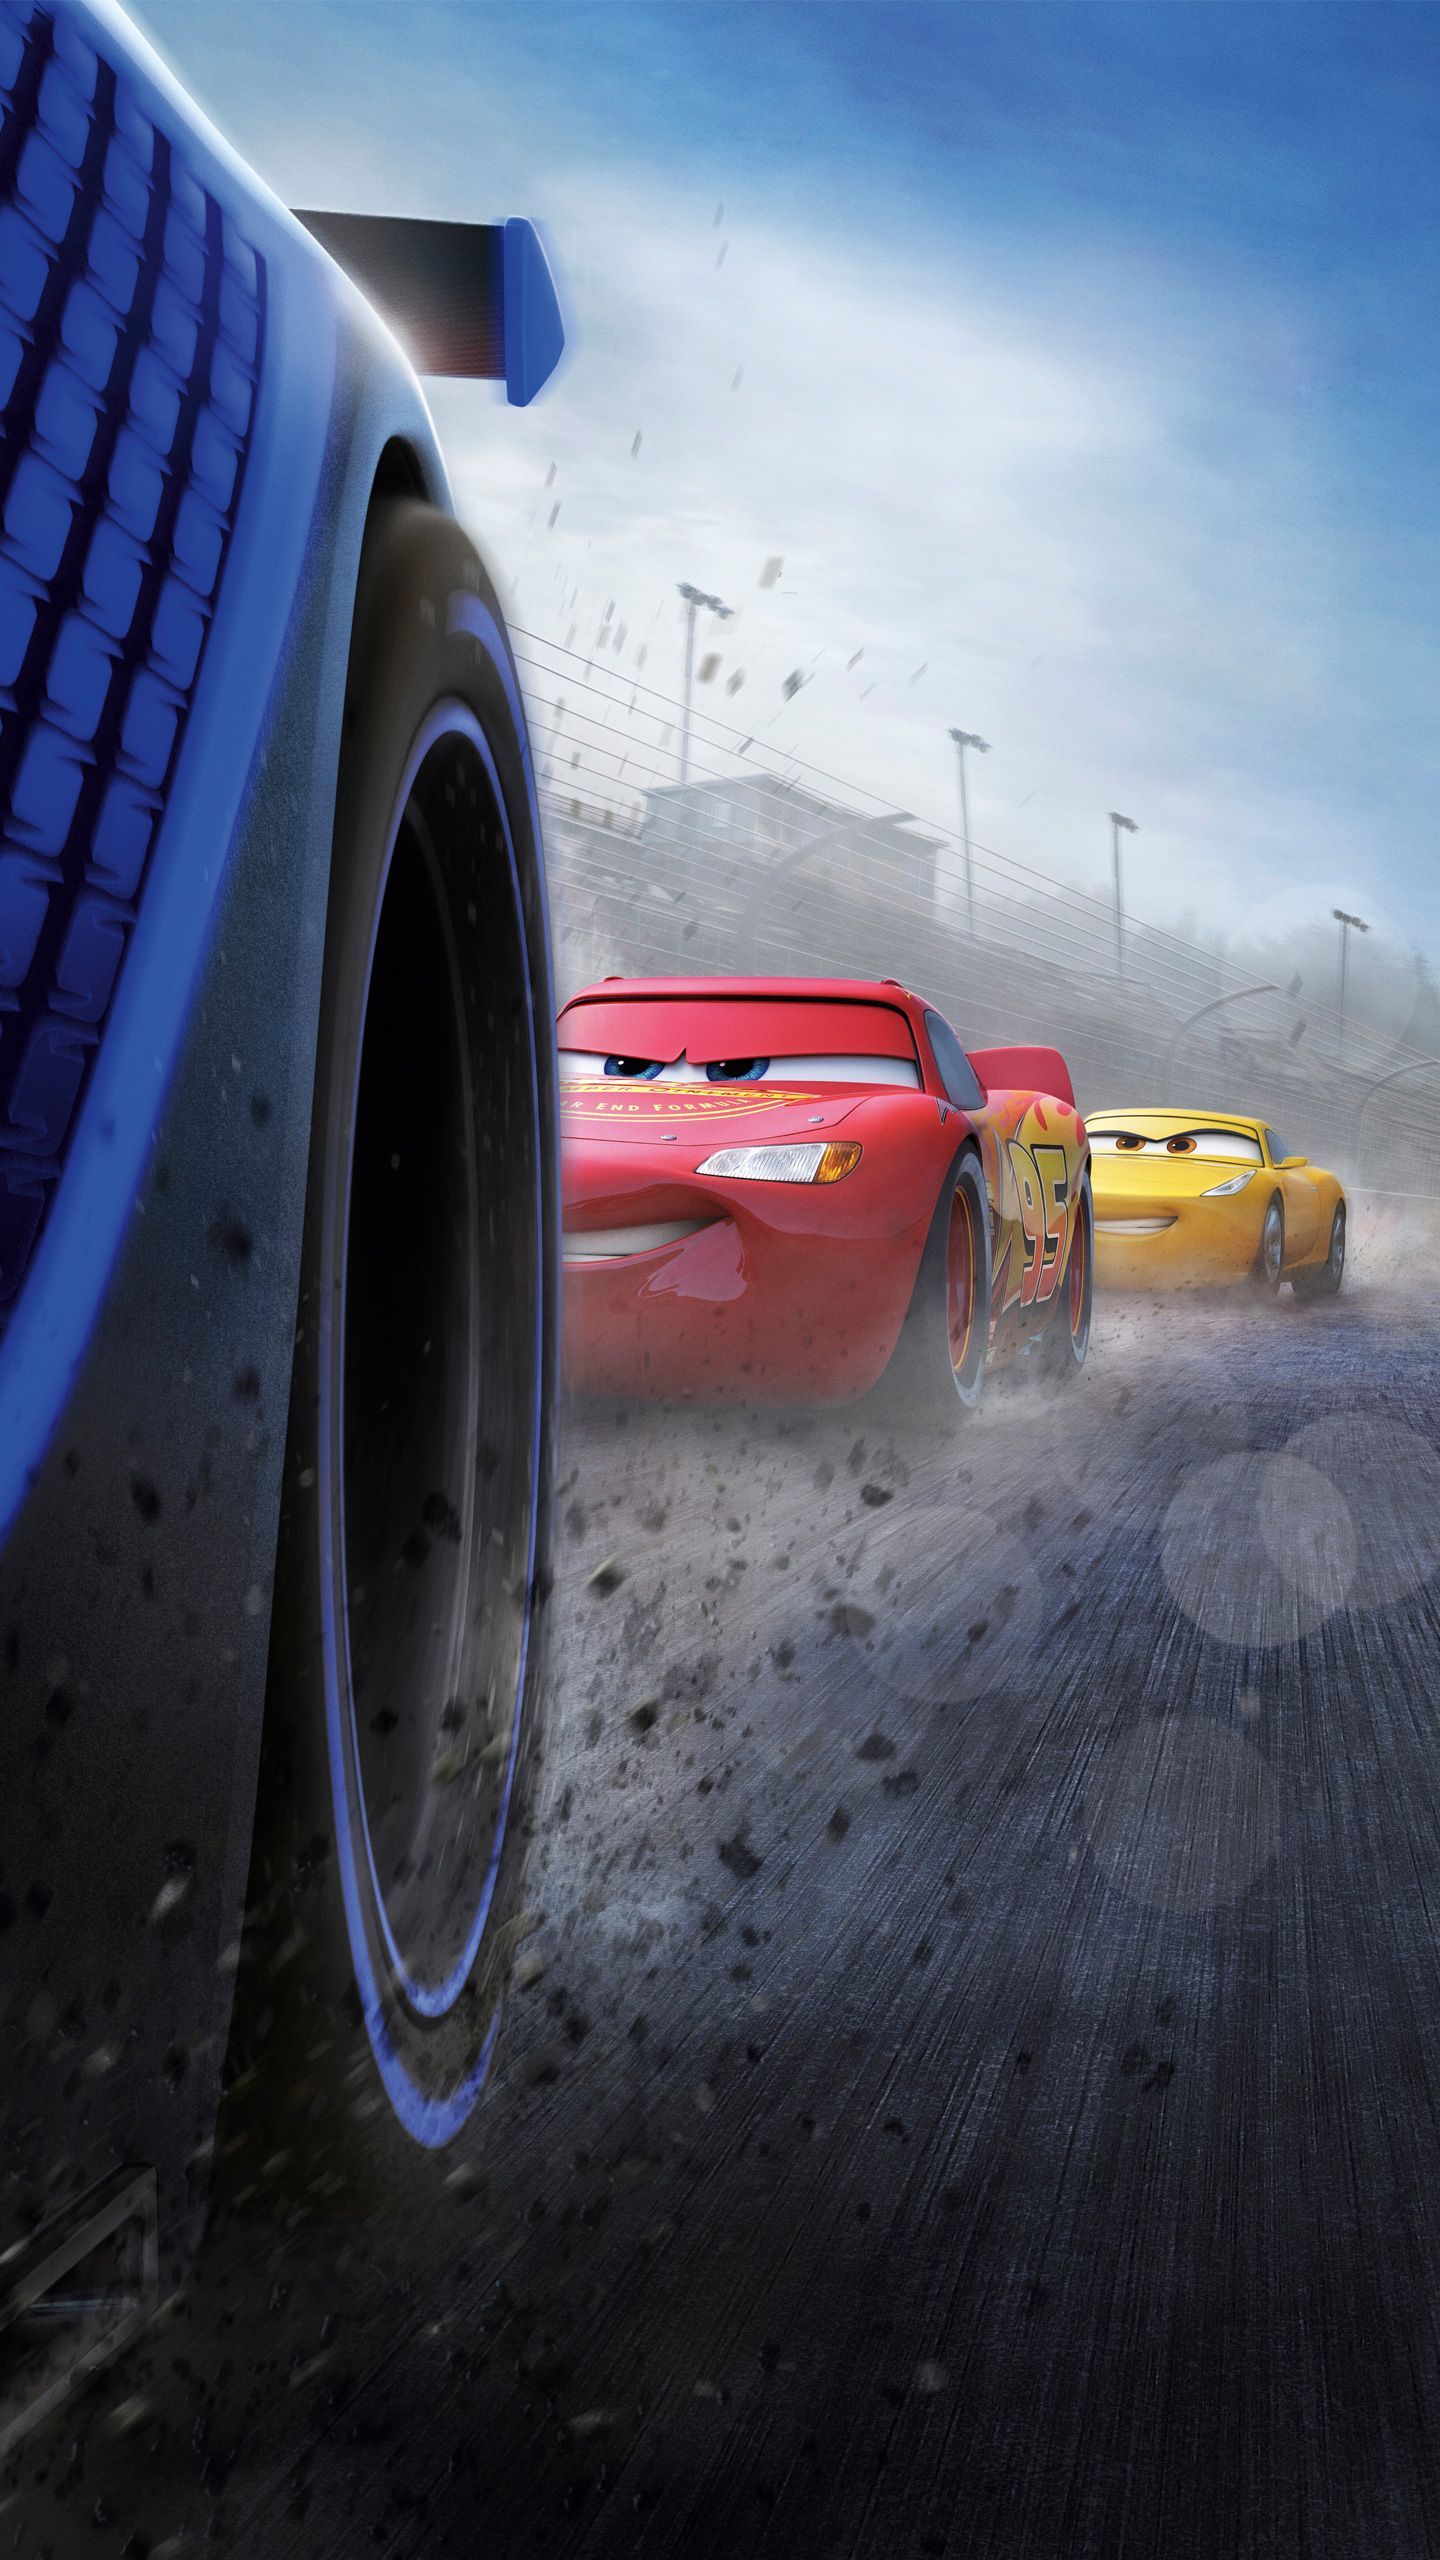 Cars 3 HQ Movie Wallpapers  Cars 3 HD Movie Wallpapers  38894  Oneindia  Wallpapers